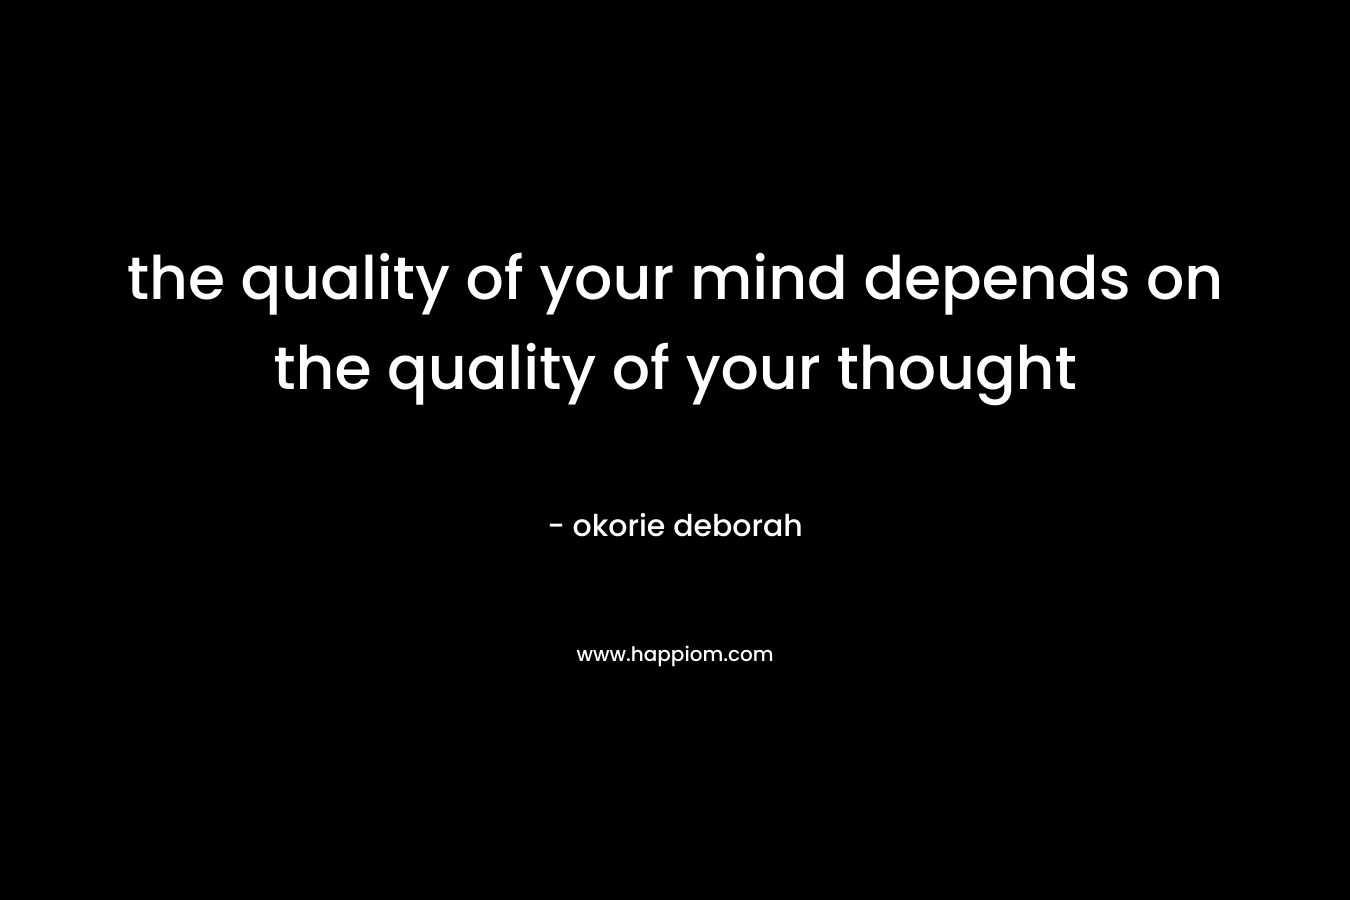 the quality of your mind depends on the quality of your thought